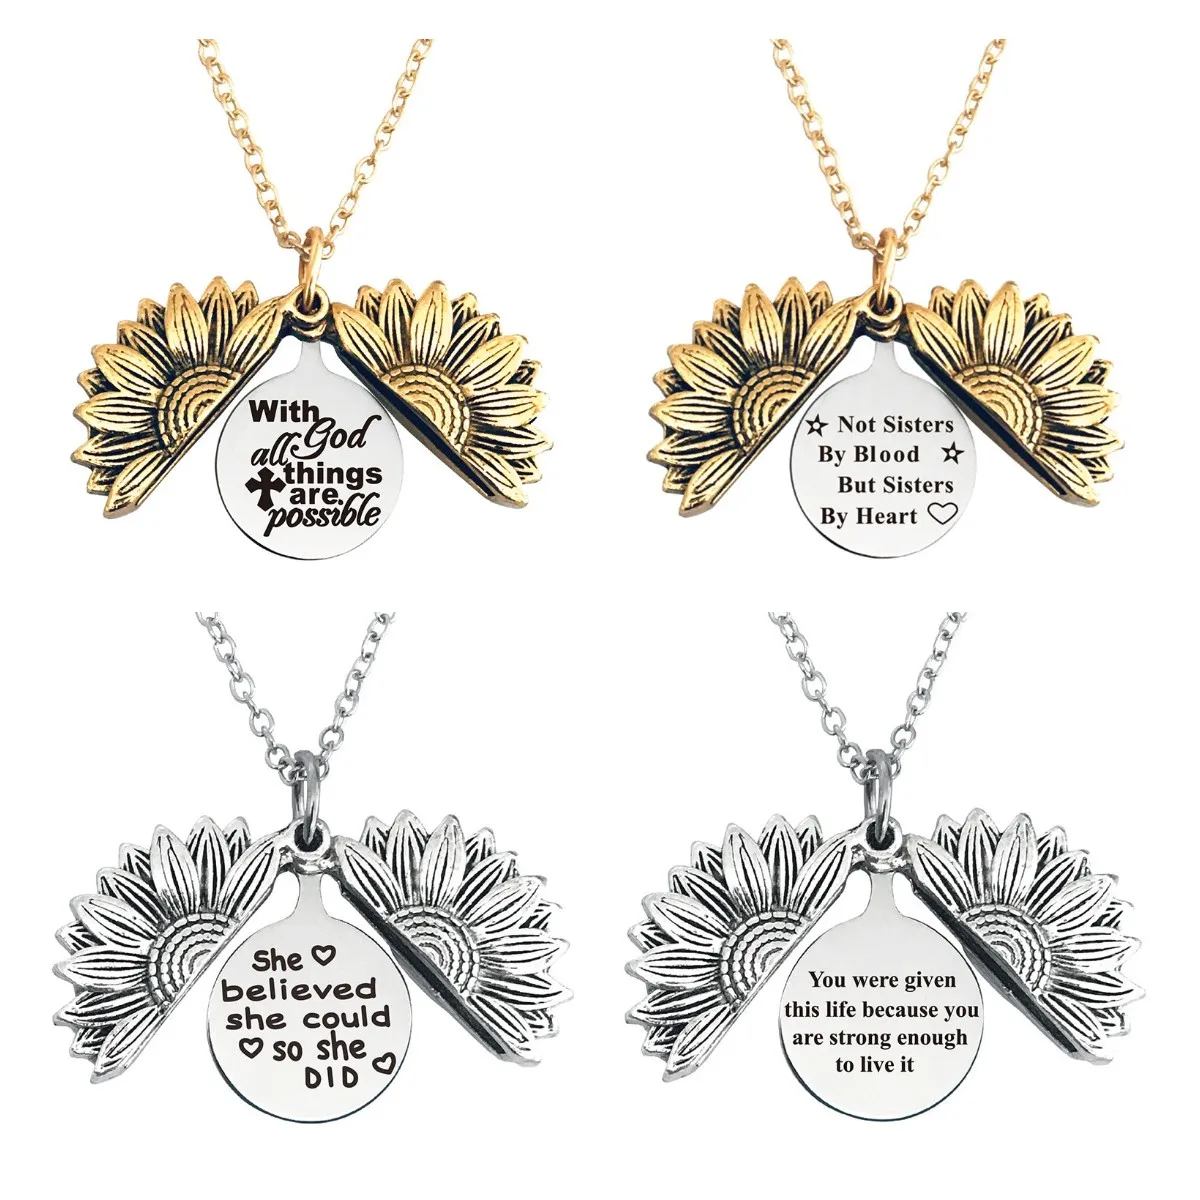 

Stainless Steel She believed she could so she did Not sisters by blood but sisters by heart Sunflower Locket Pendant Necklace, Multi-colors/accept custom colors